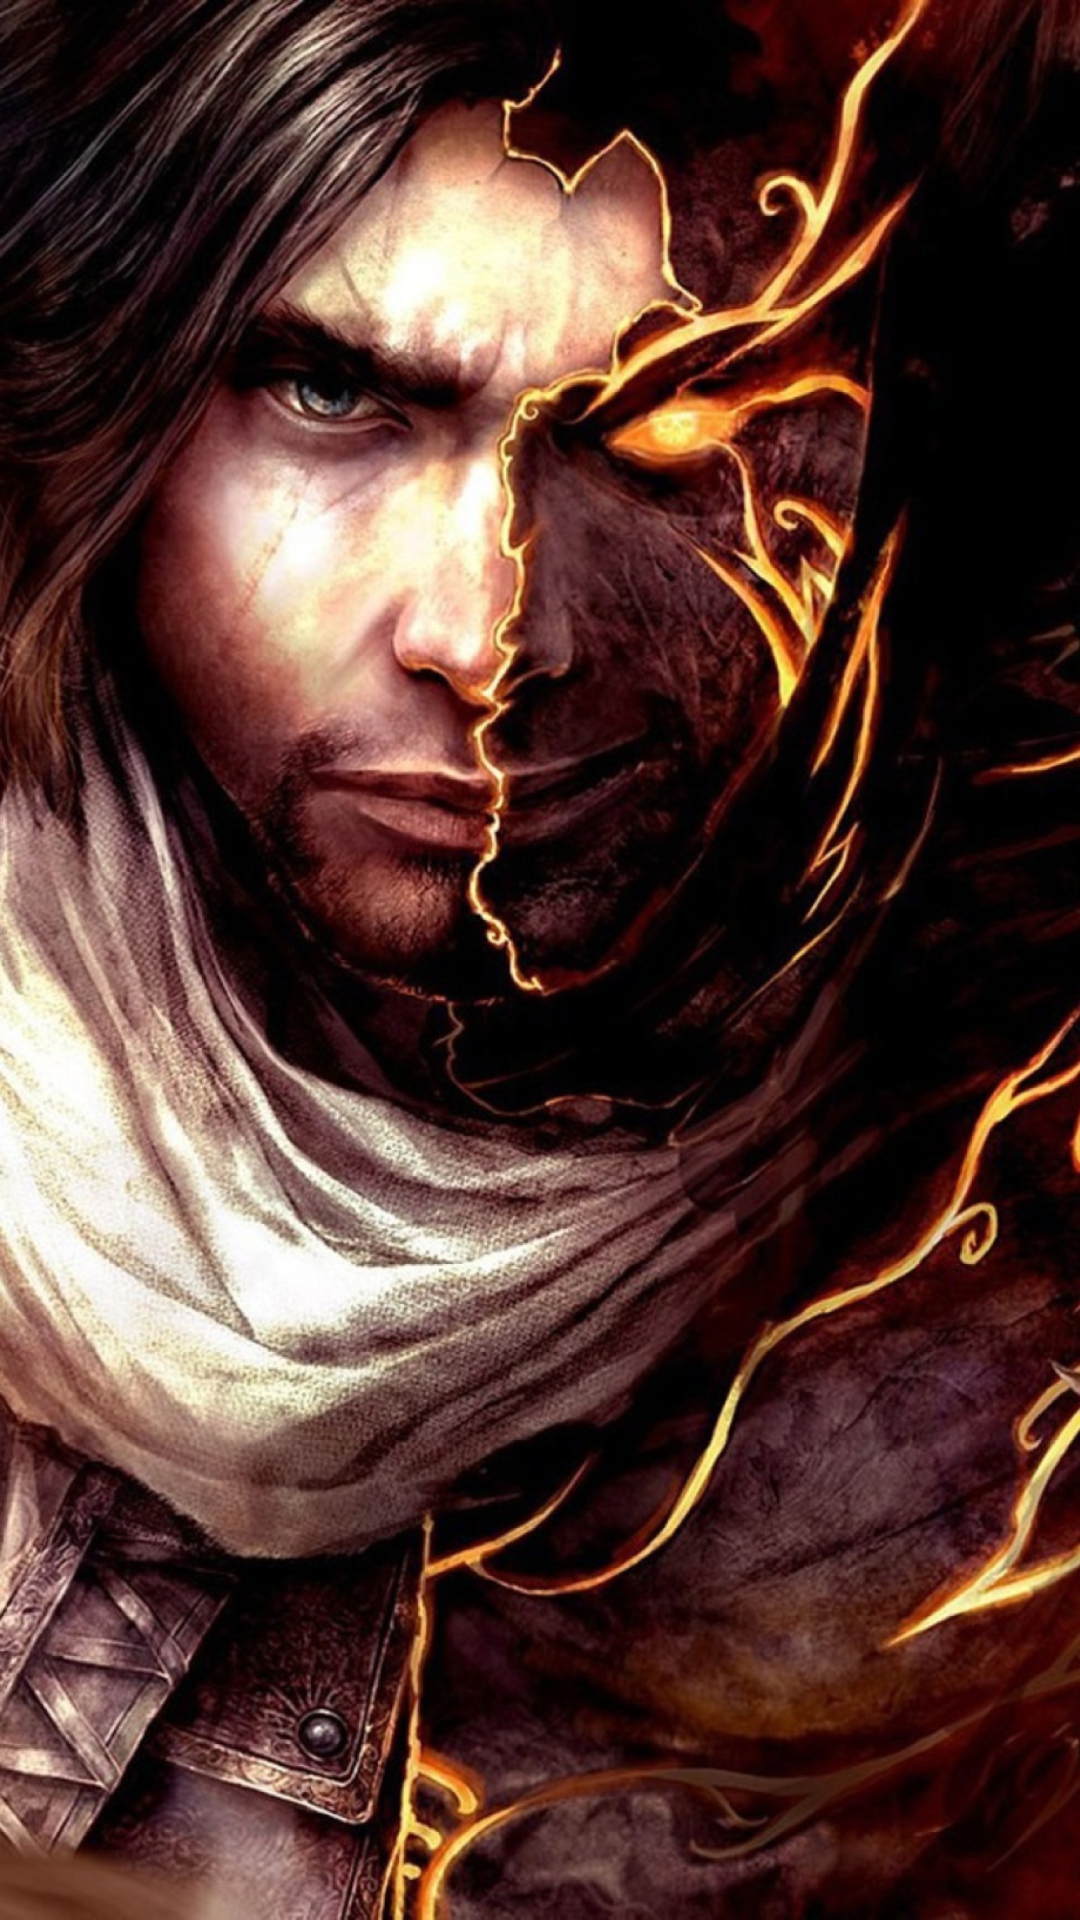 Das Prince Of Persia - The Two Thrones Wallpaper 1080x1920